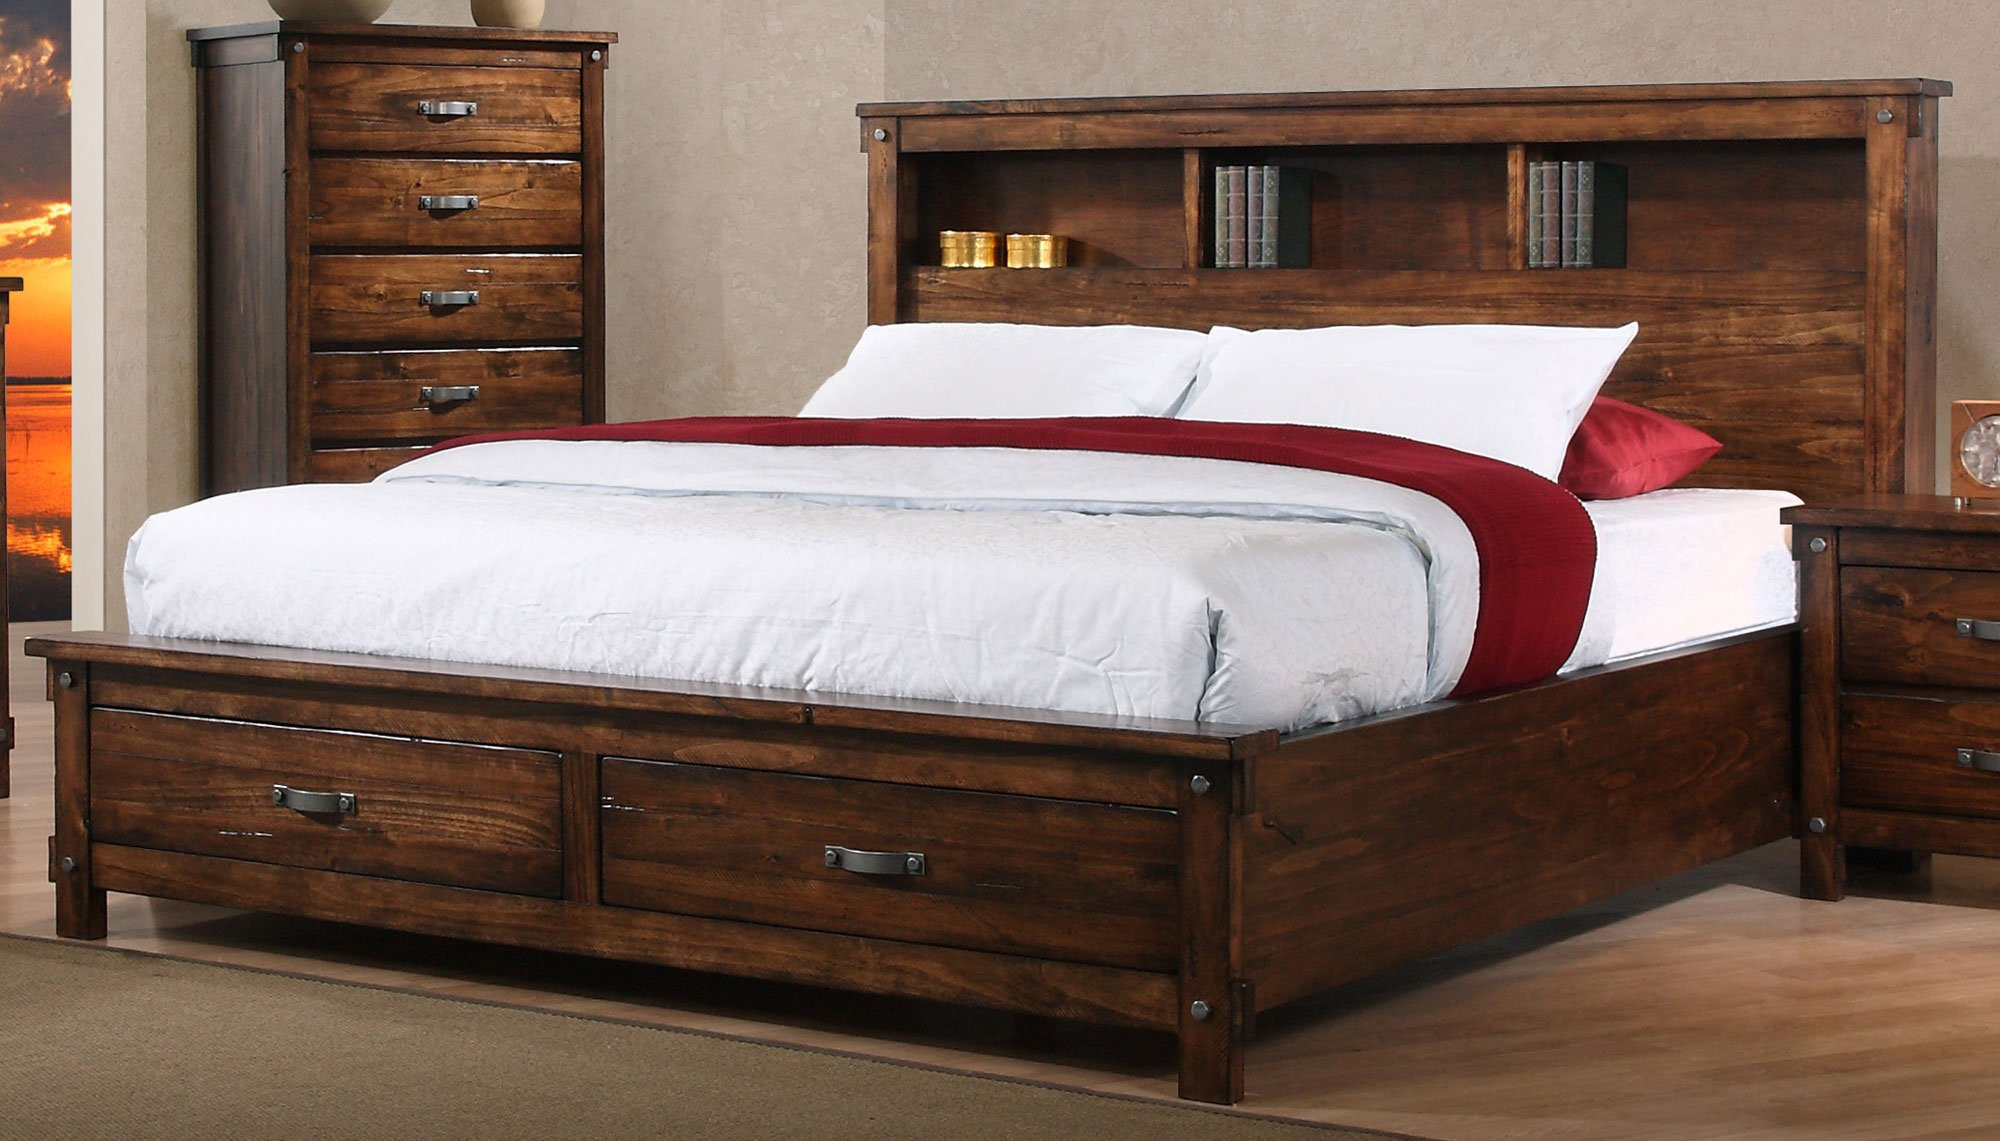 King Bedroom Sets With Storage
 Brown Rustic Classic 6 Piece California King Bedroom Set